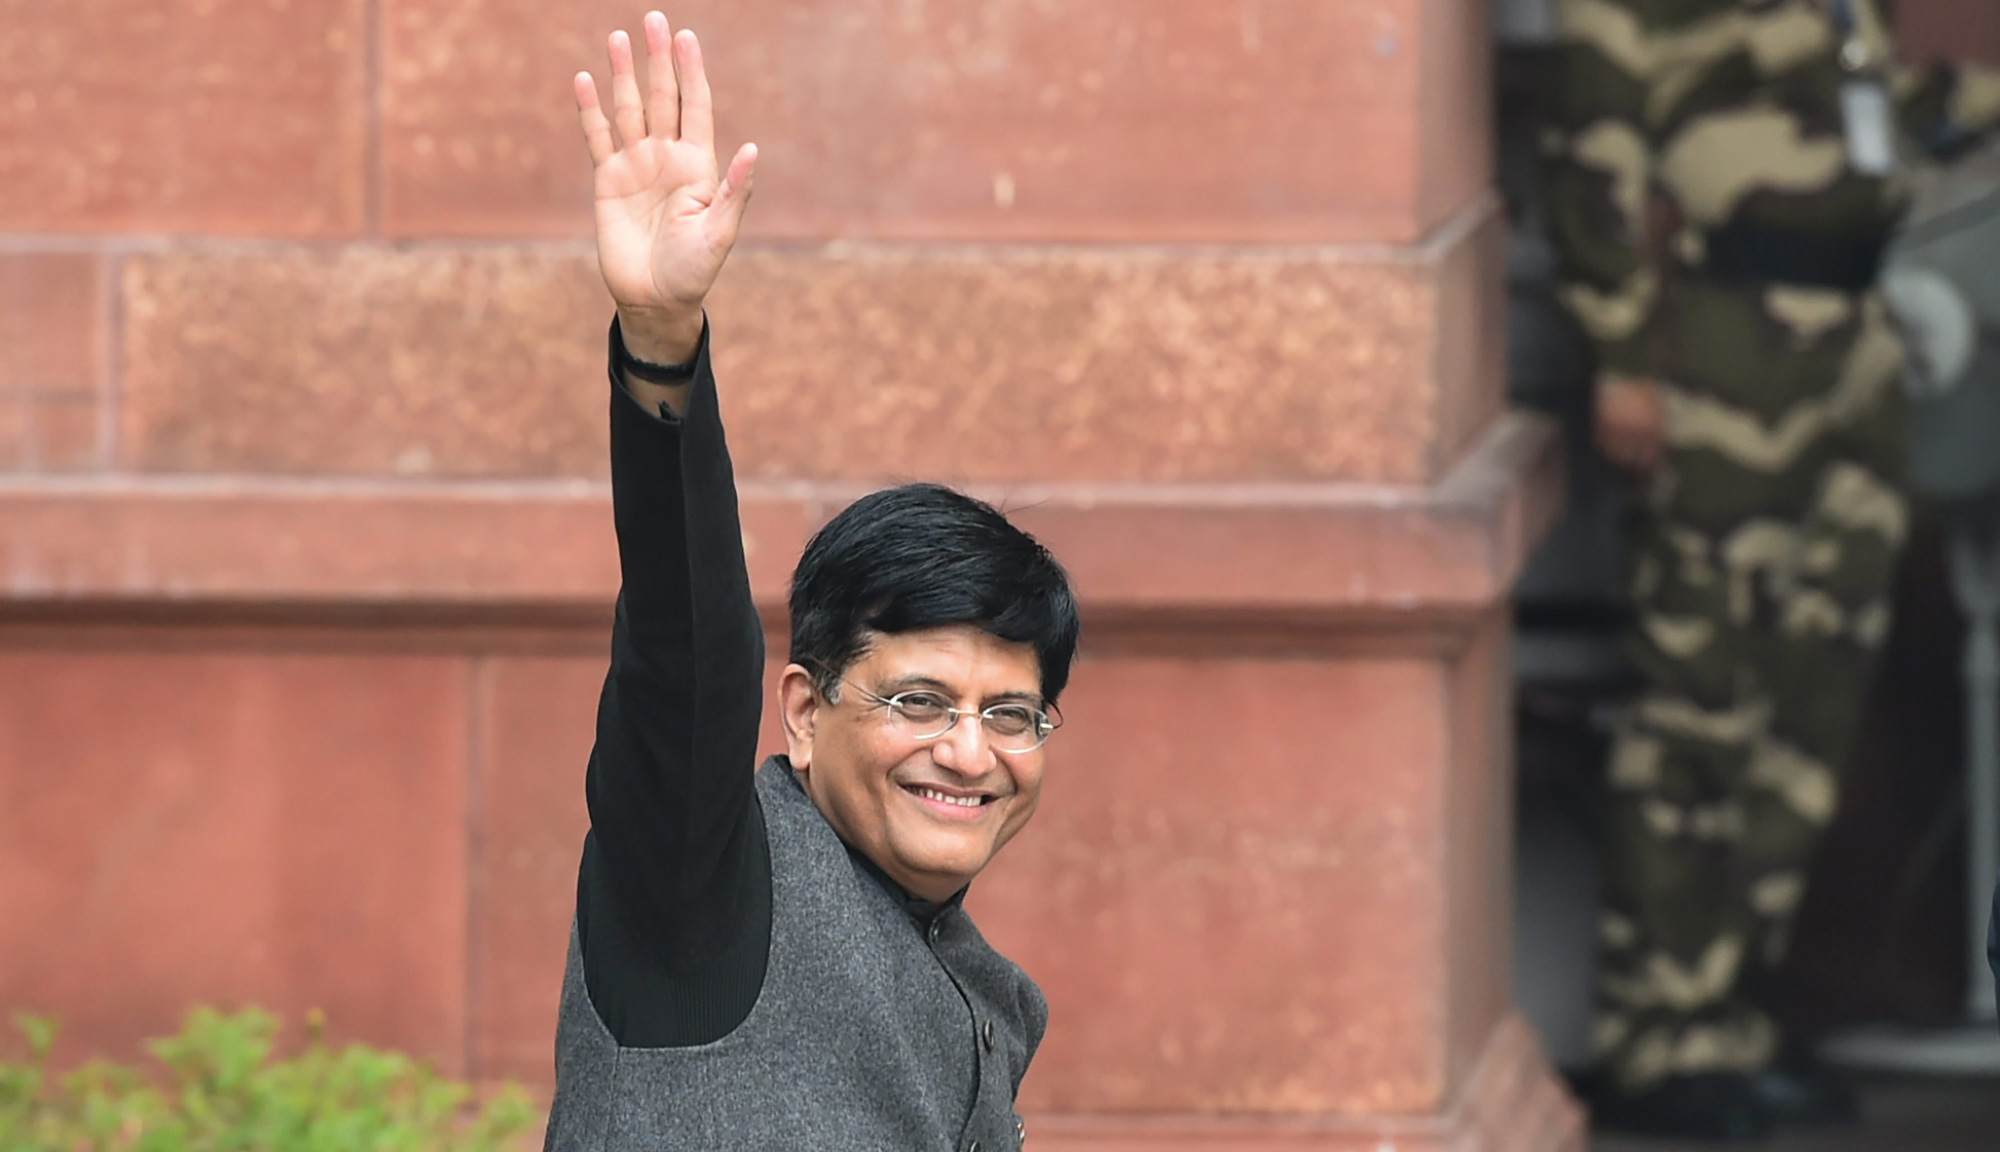 Union Finance Minister Piyush Goyal arrives at North Block in New Delhi on Friday, February 1, 2019.